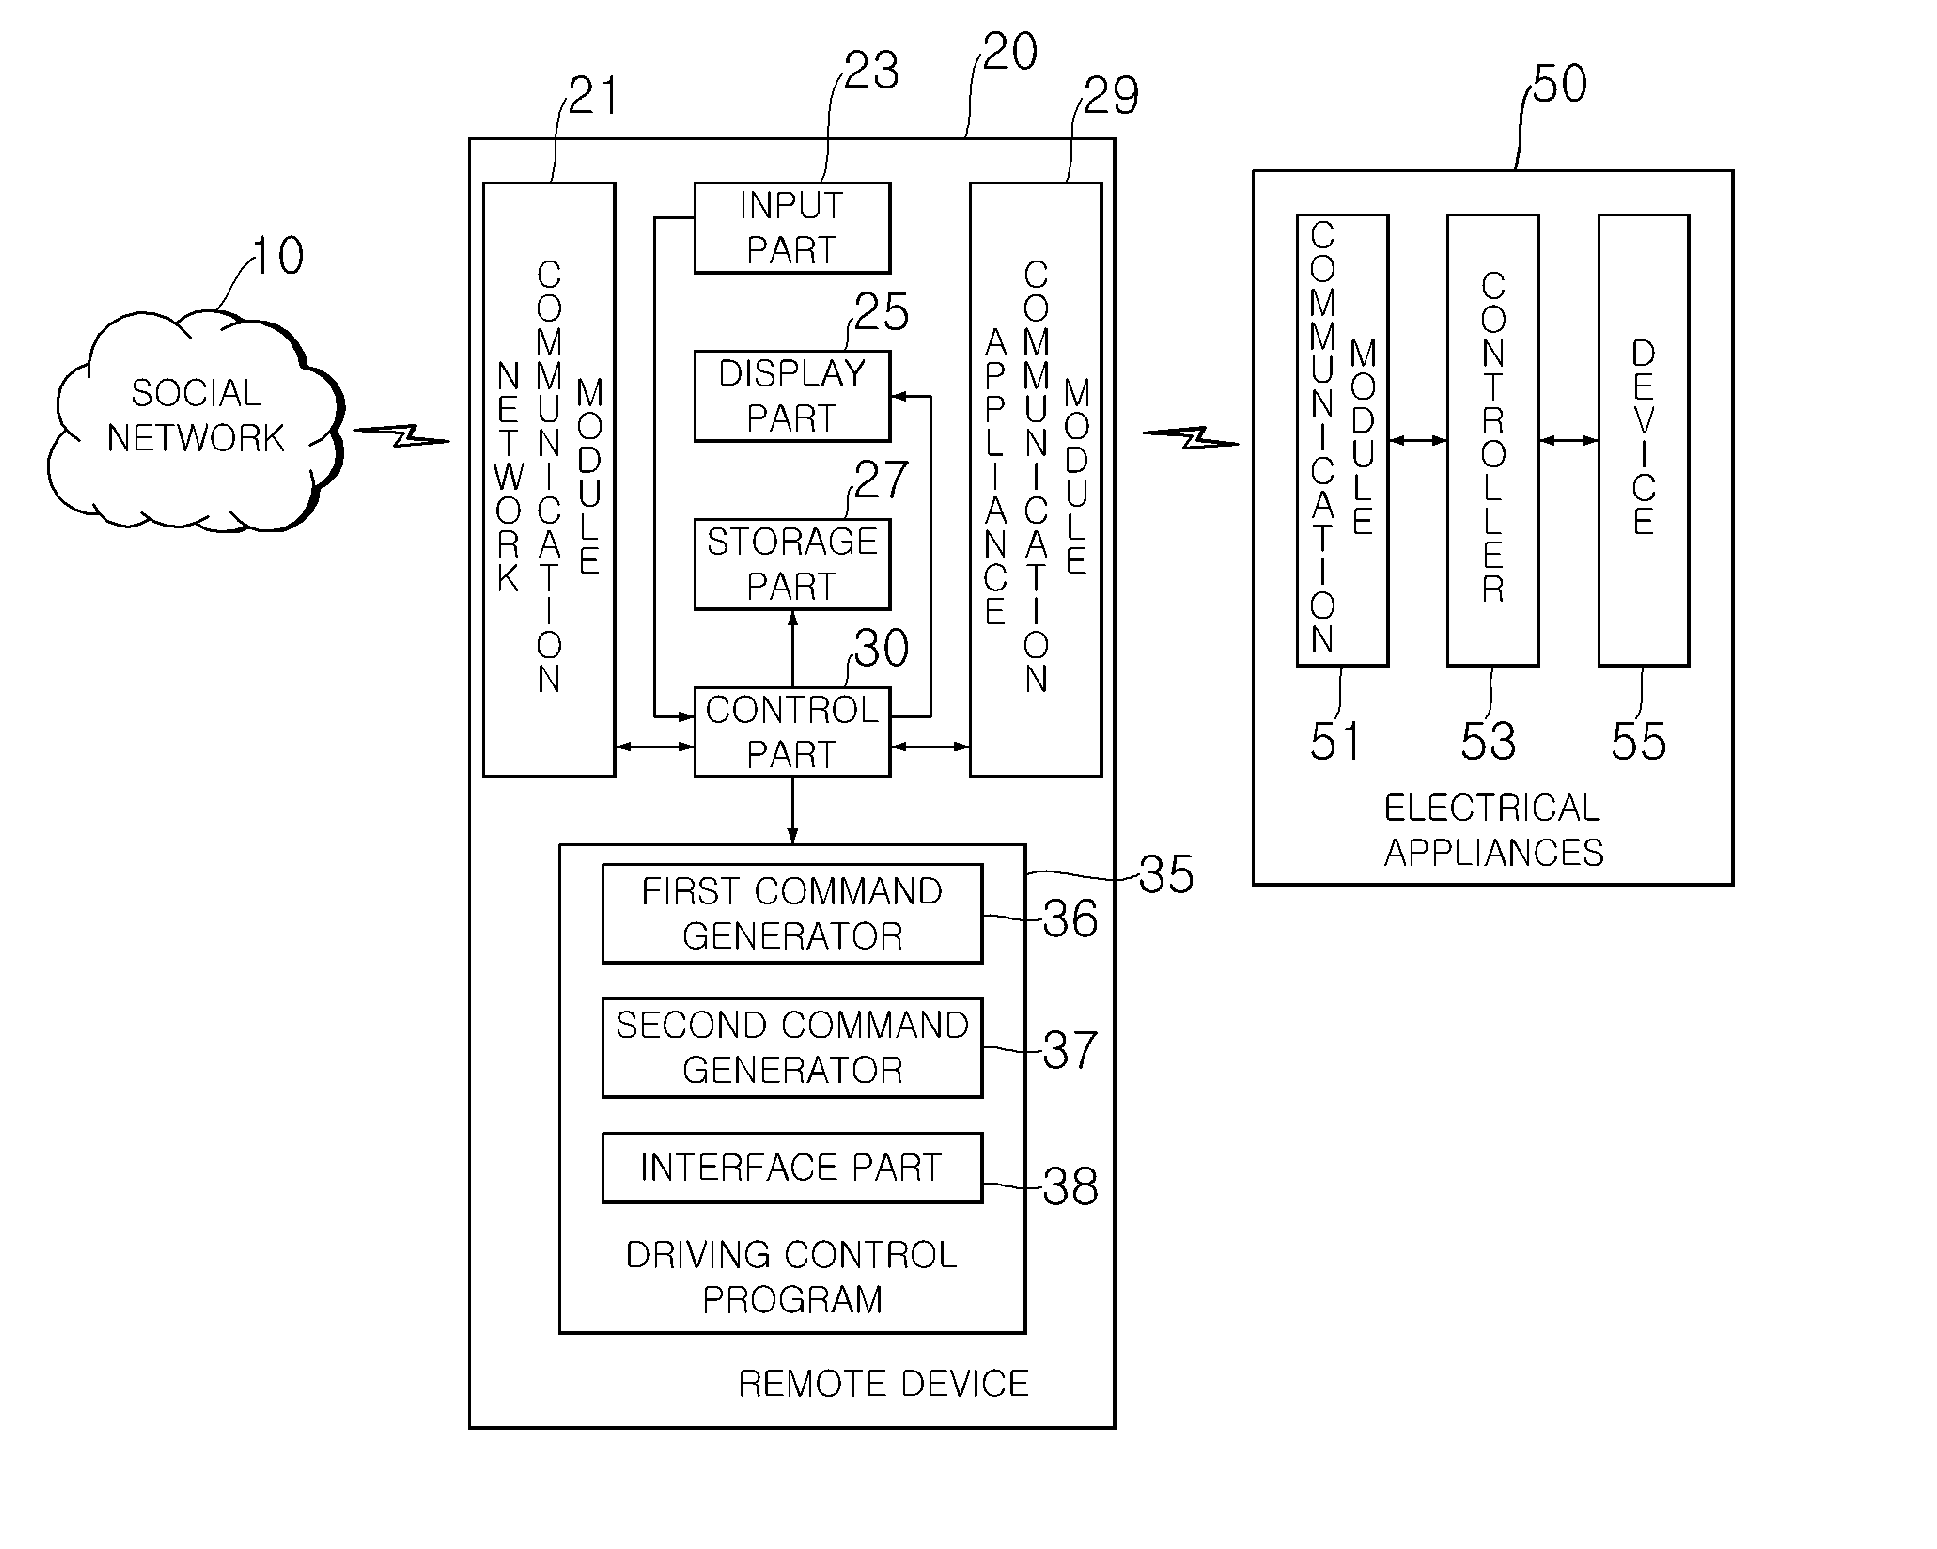 Customized control system for electrical appliances using remote device